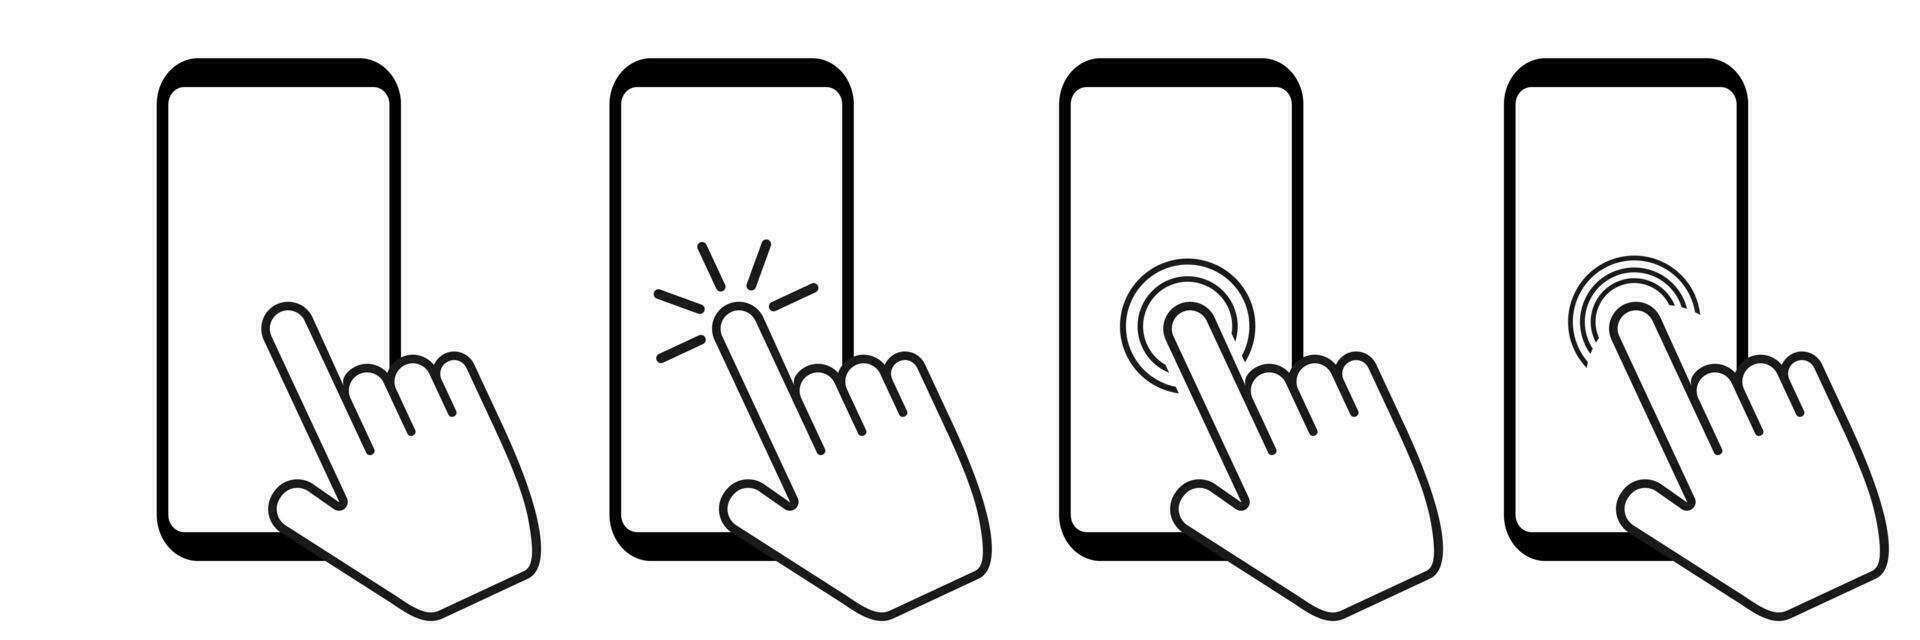 Smartphone screen with clicking finger. Touch display with hand on white background. Isolated mobile device with tap symbol. Choice cursor pictogram collection. Vector set. EPS 10.